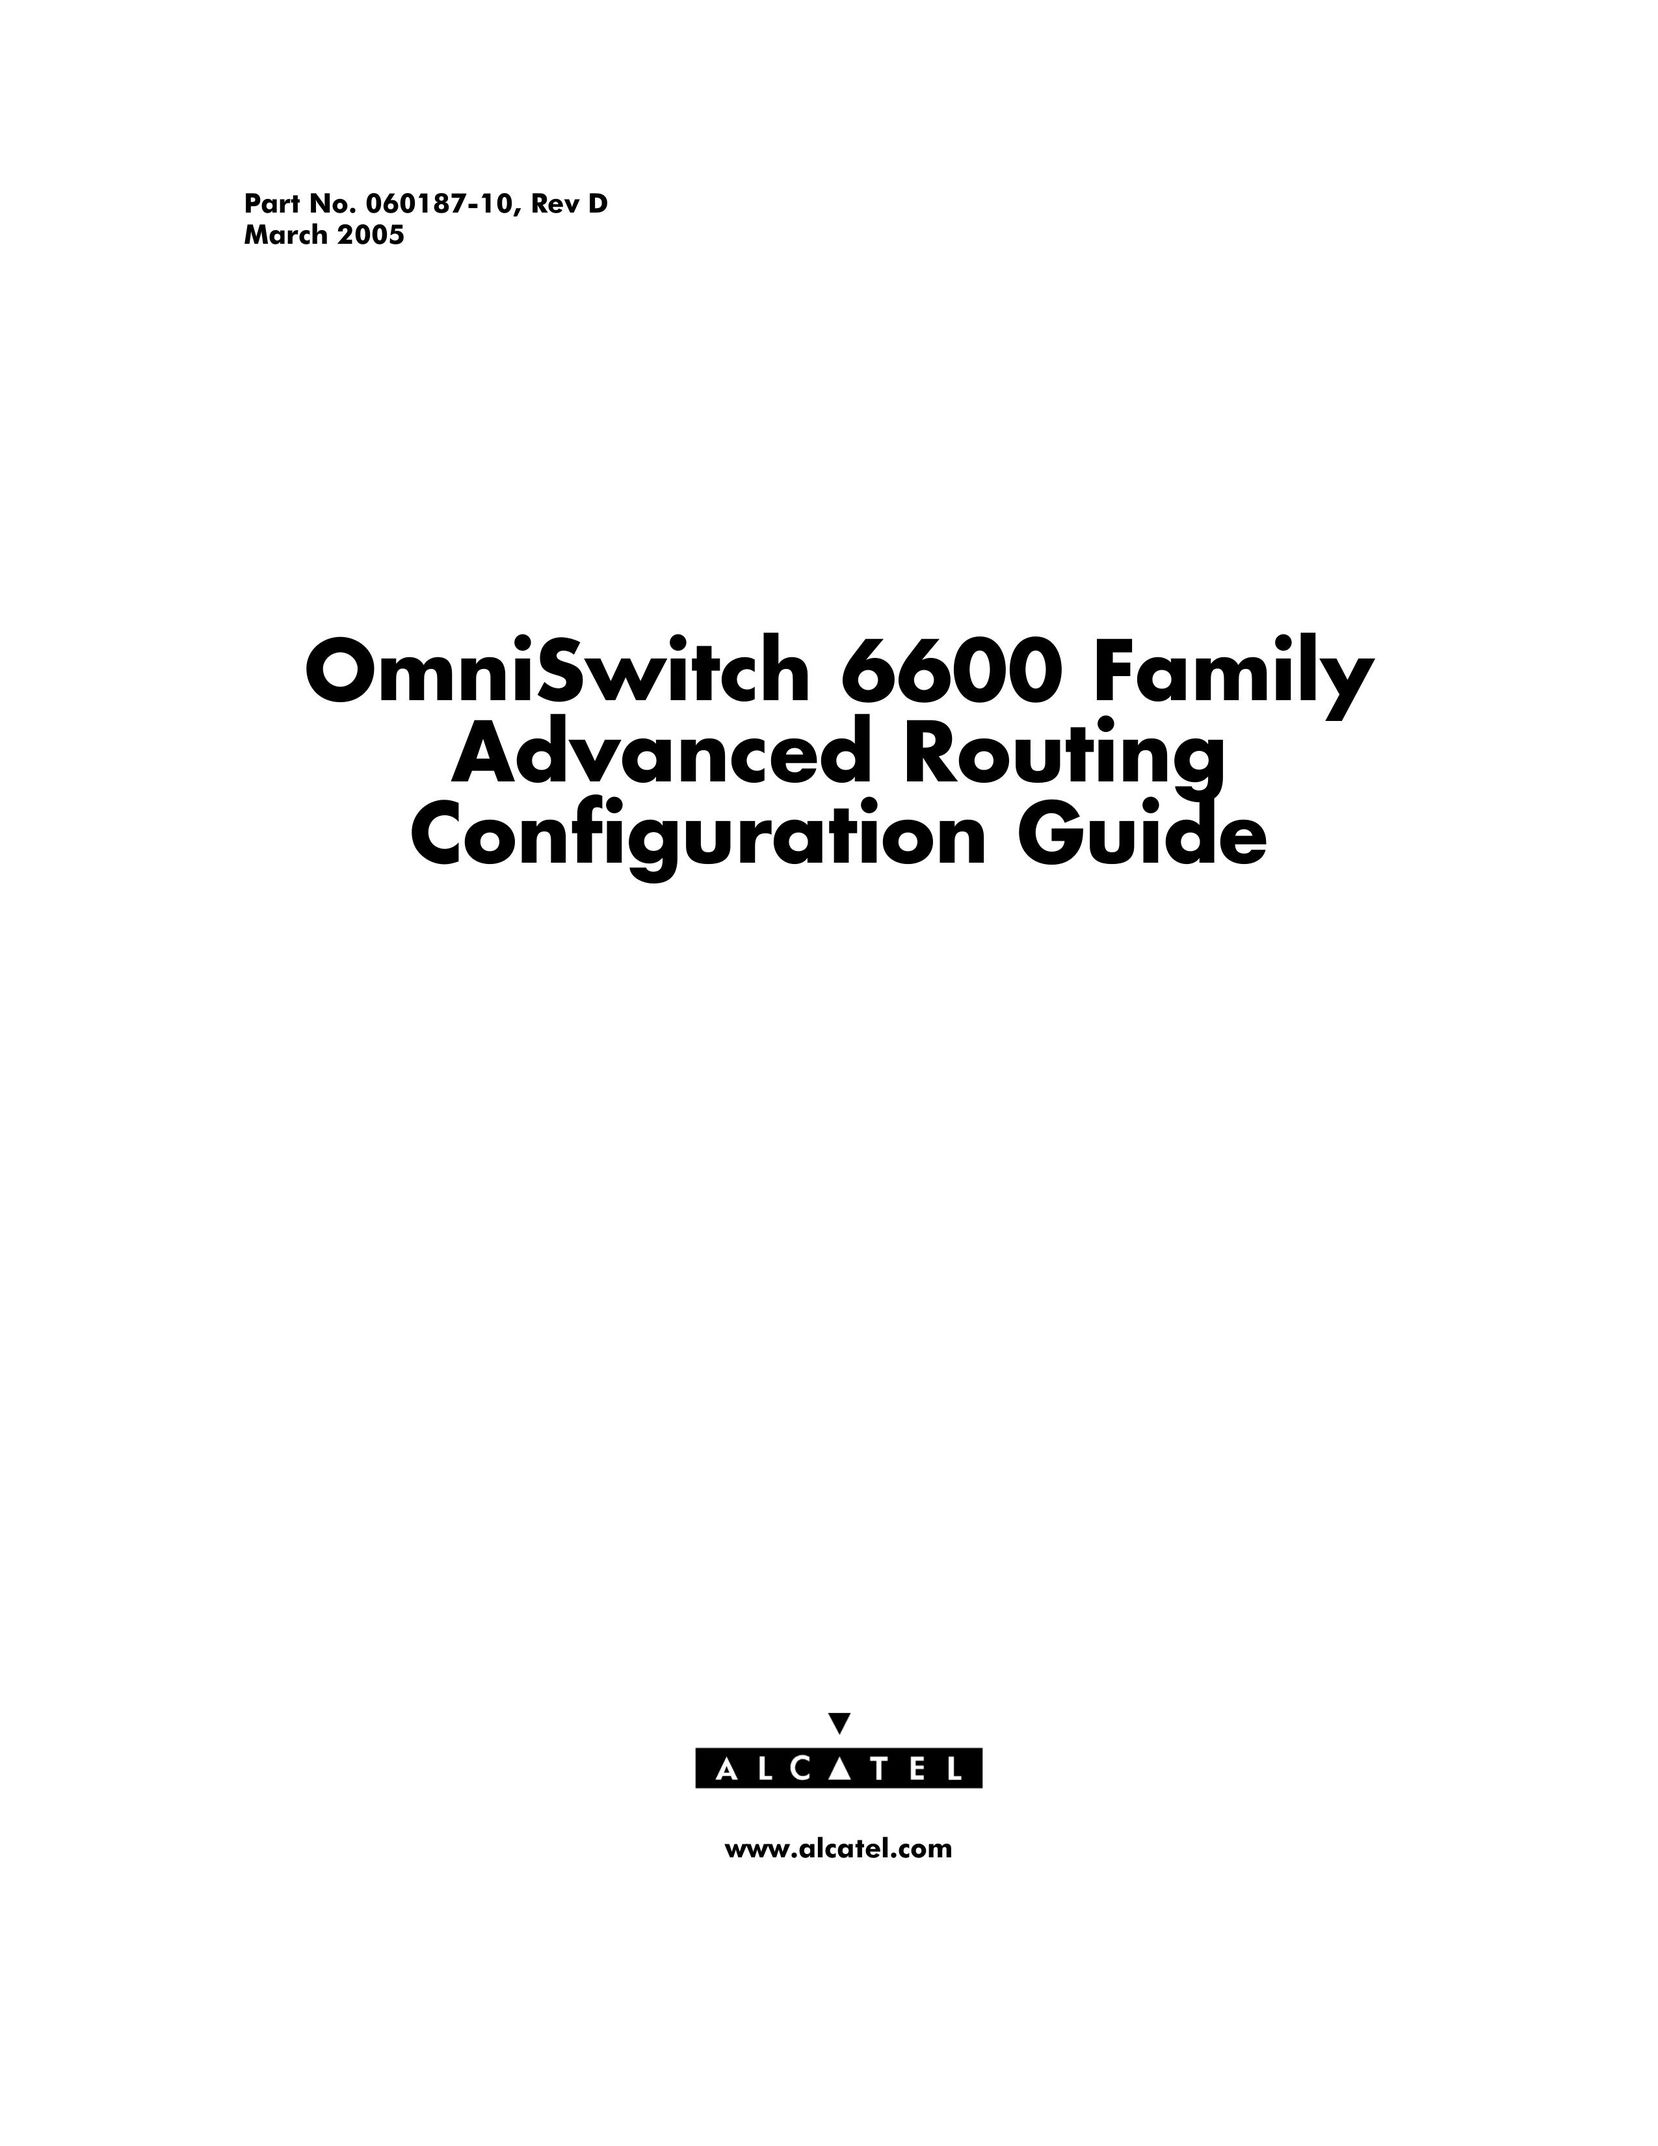 Alcatel Carrier Internetworking Solutions 060187-10 REV D Network Router User Manual